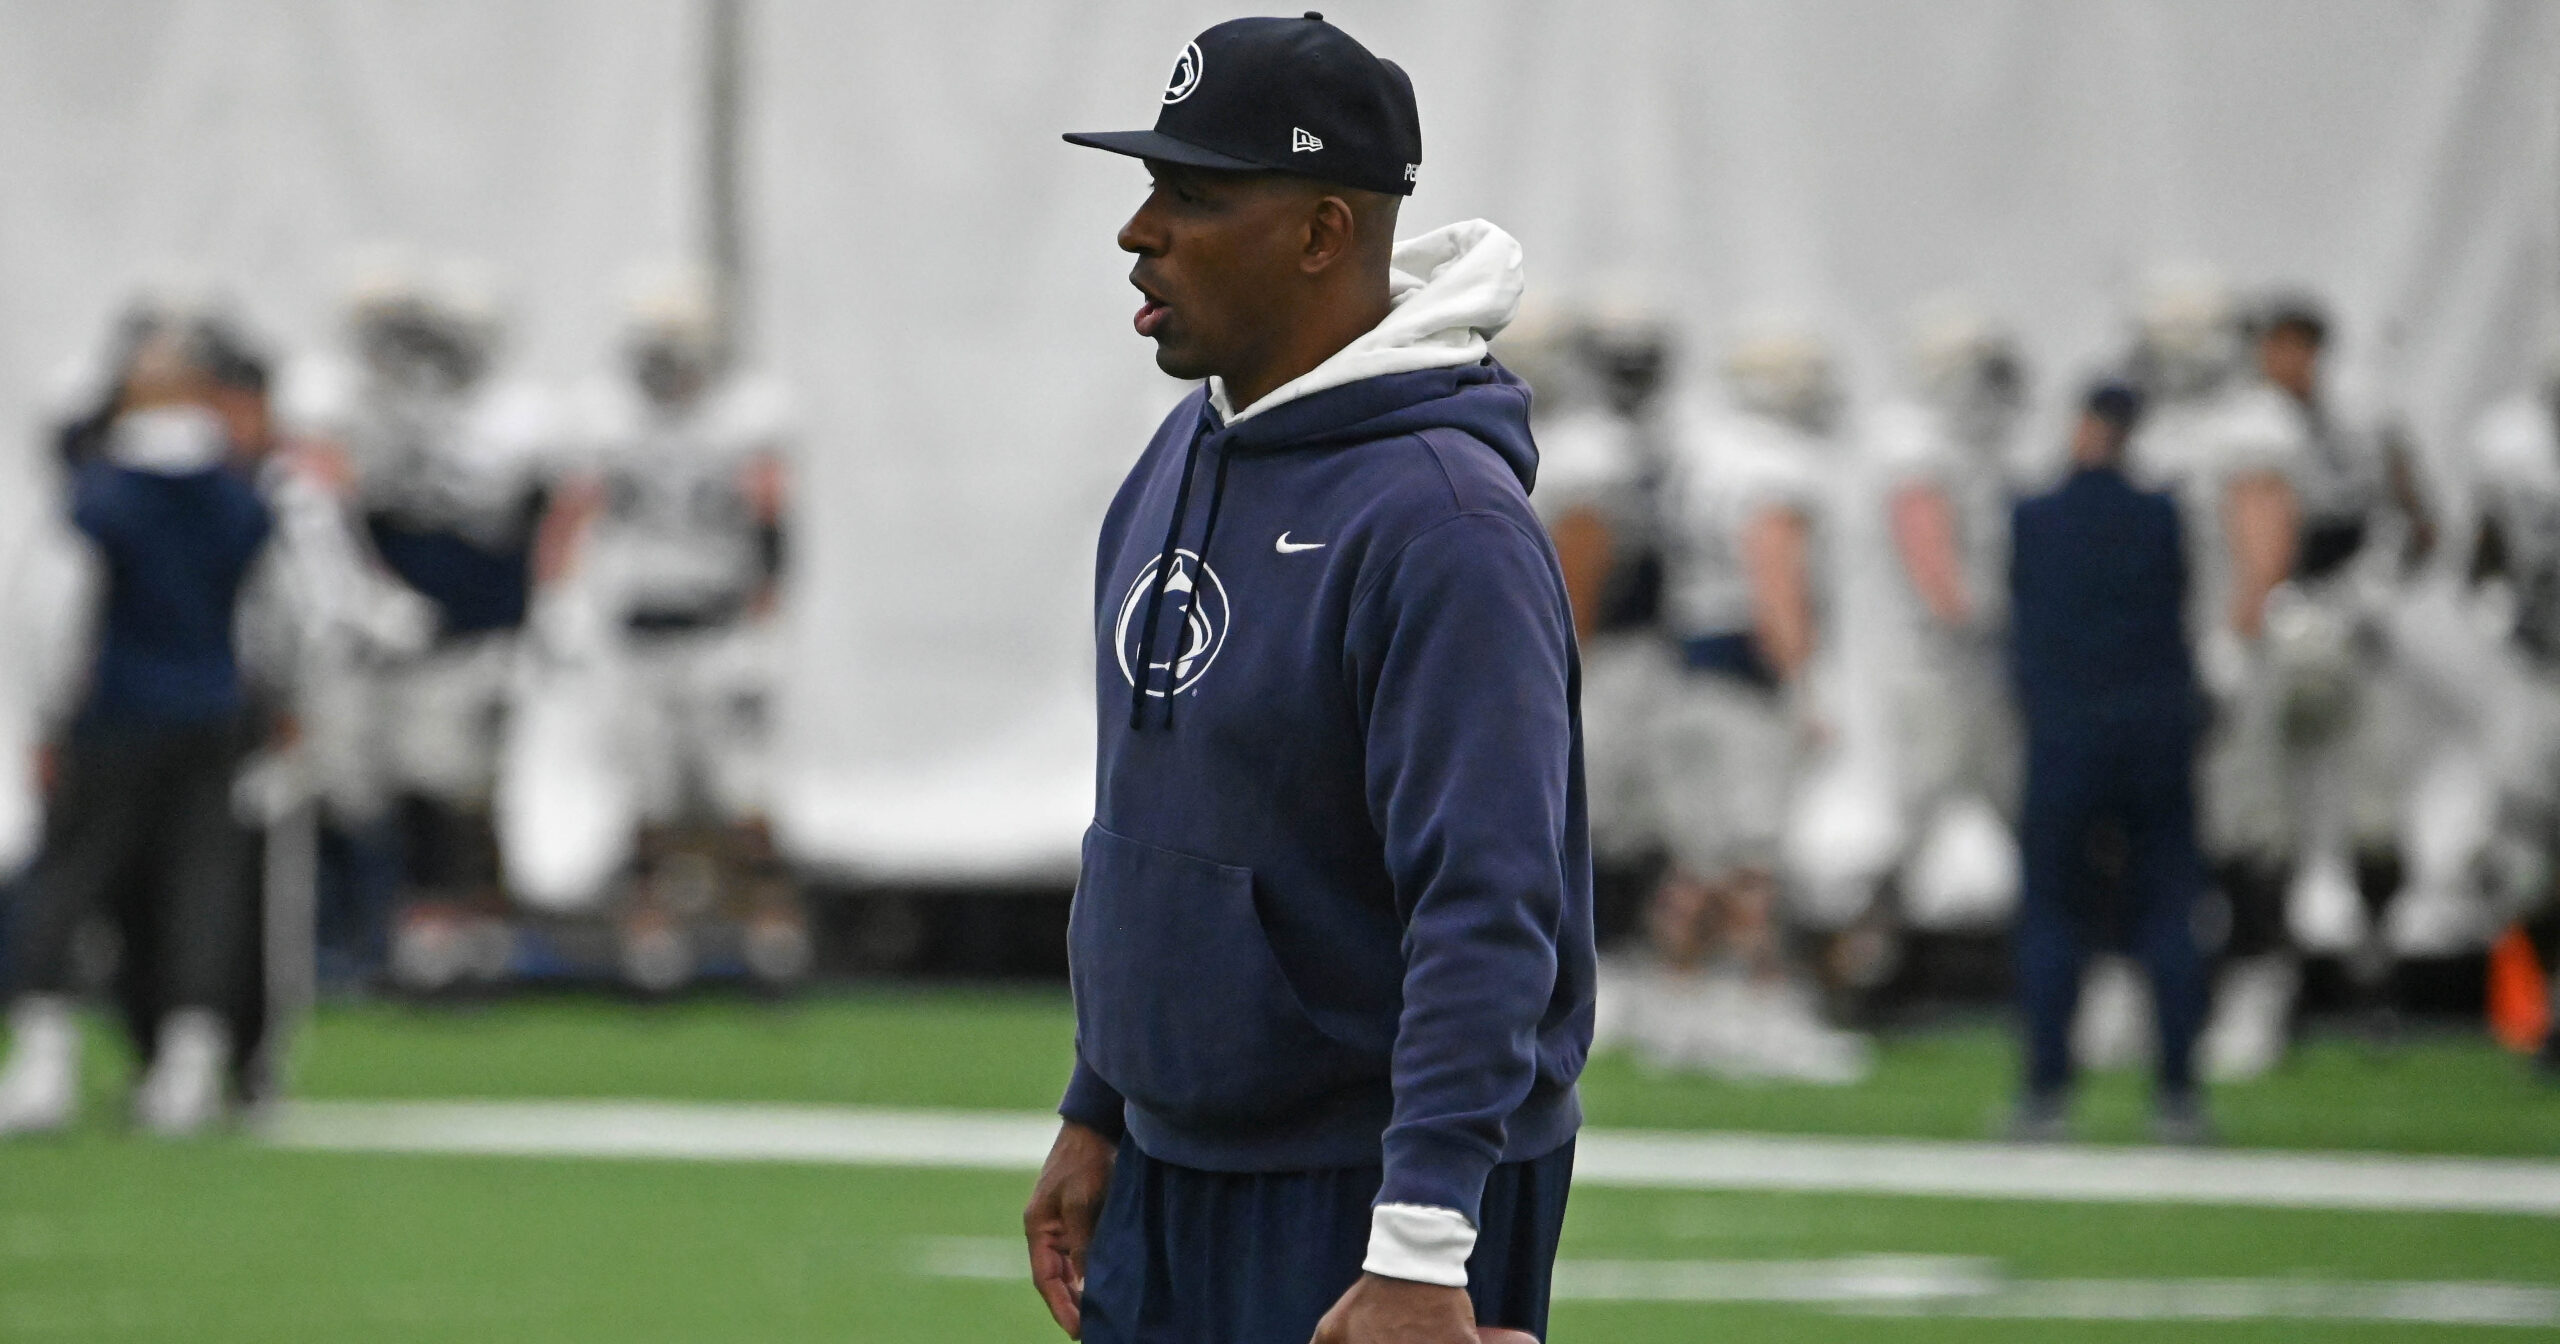 Penn State safeties coach Anthony Poindexter